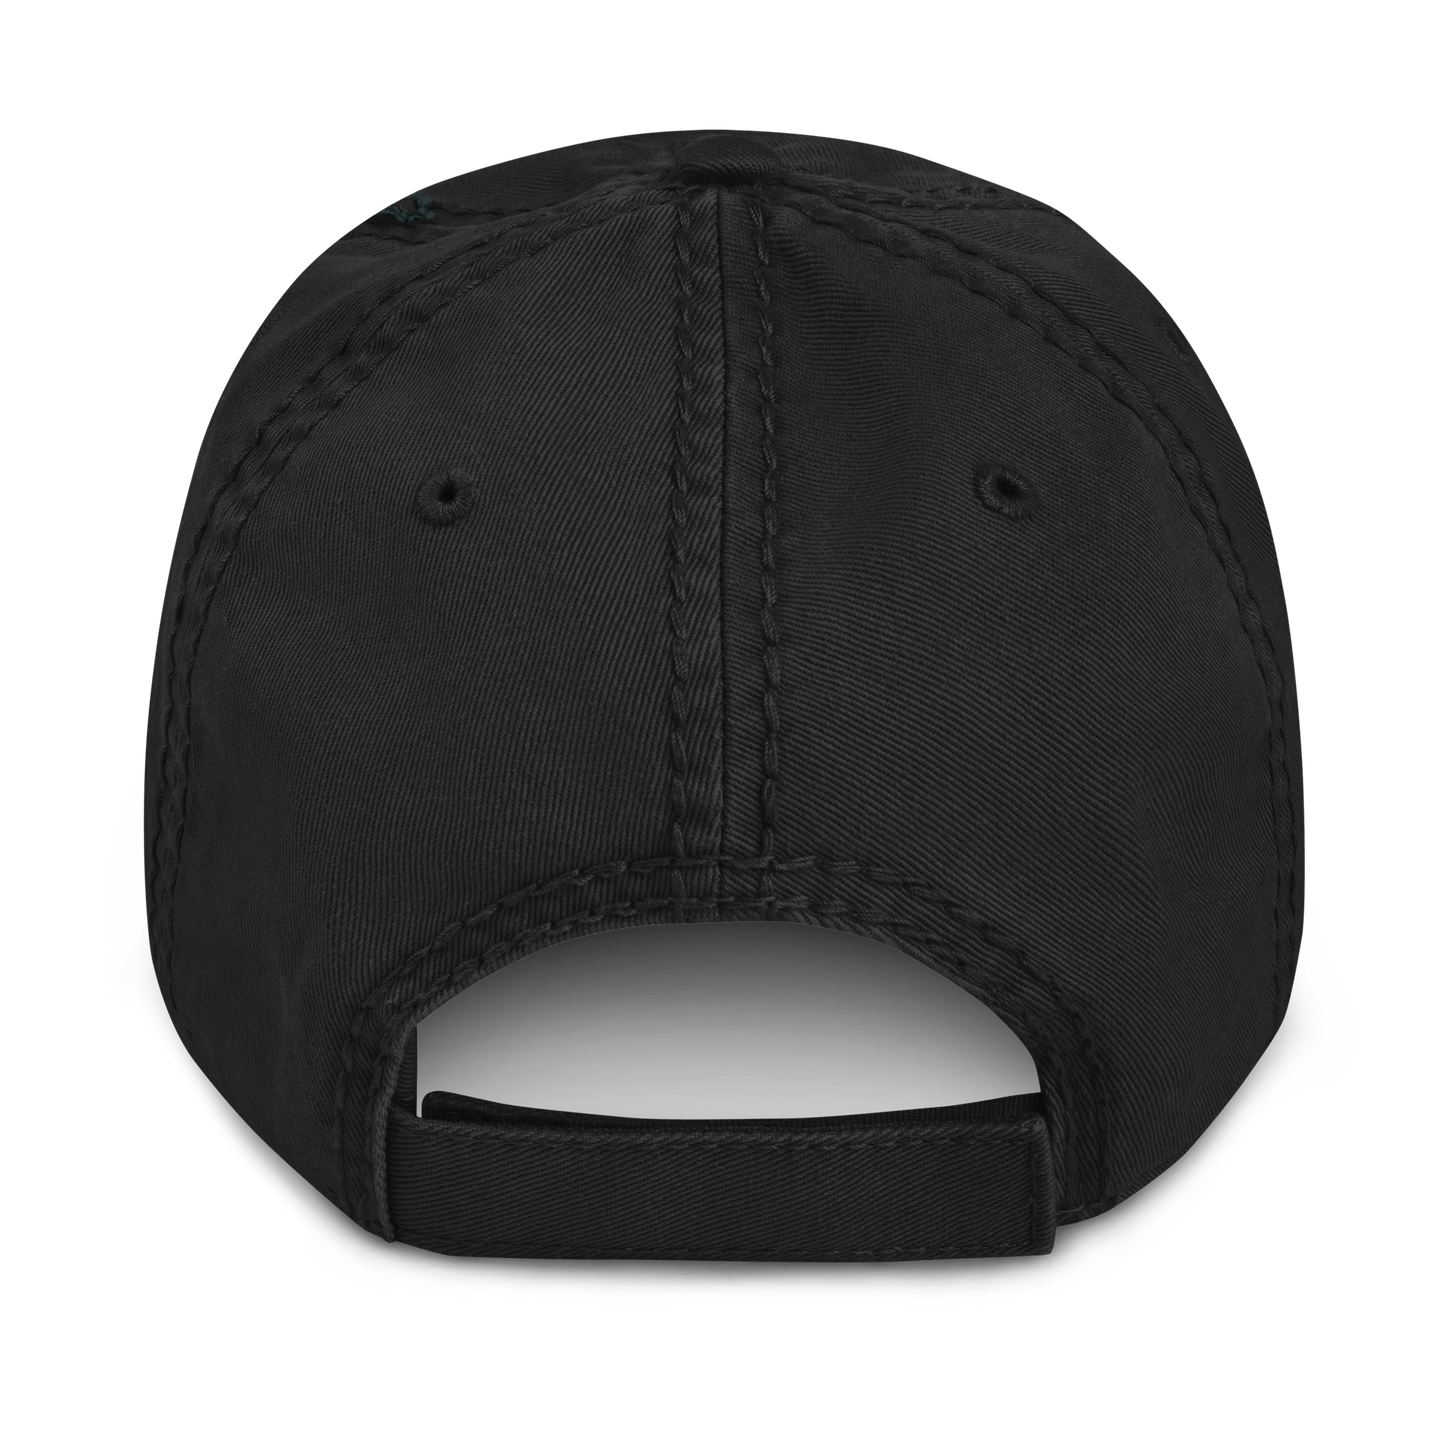 Great Lakes Distressed Dad Hat